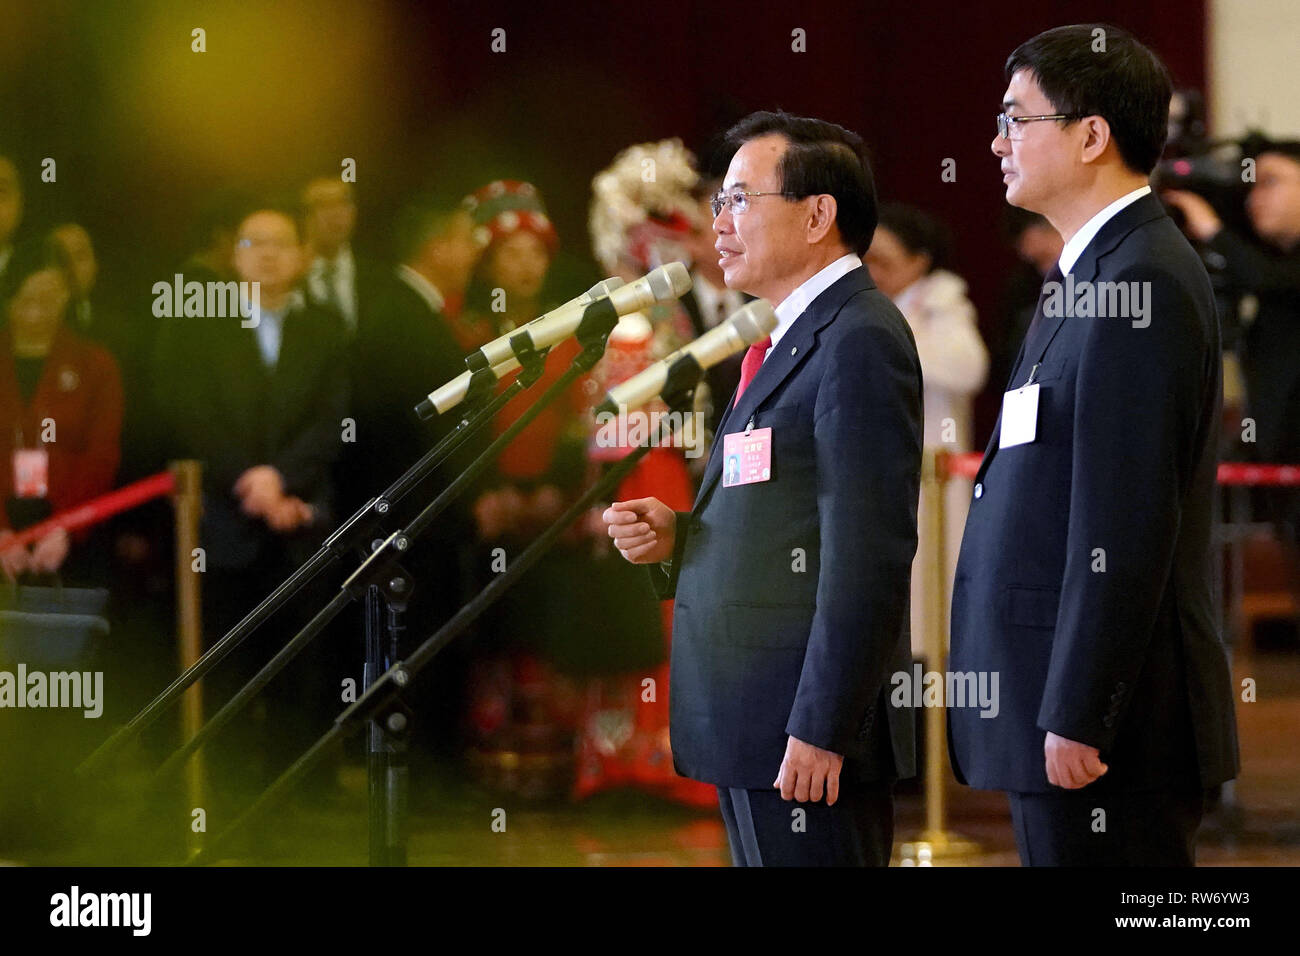 Beijing, China. 5th Mar, 2019. Li Dongsheng (L) and Chen Gang, deputies to the 13th National People's Congress (NPC), receive an interview before the opening meeting of the second session of the 13th NPC in Beijing, capital of China, March 5, 2019. Credit: Wang Yuguo/Xinhua/Alamy Live News Stock Photo